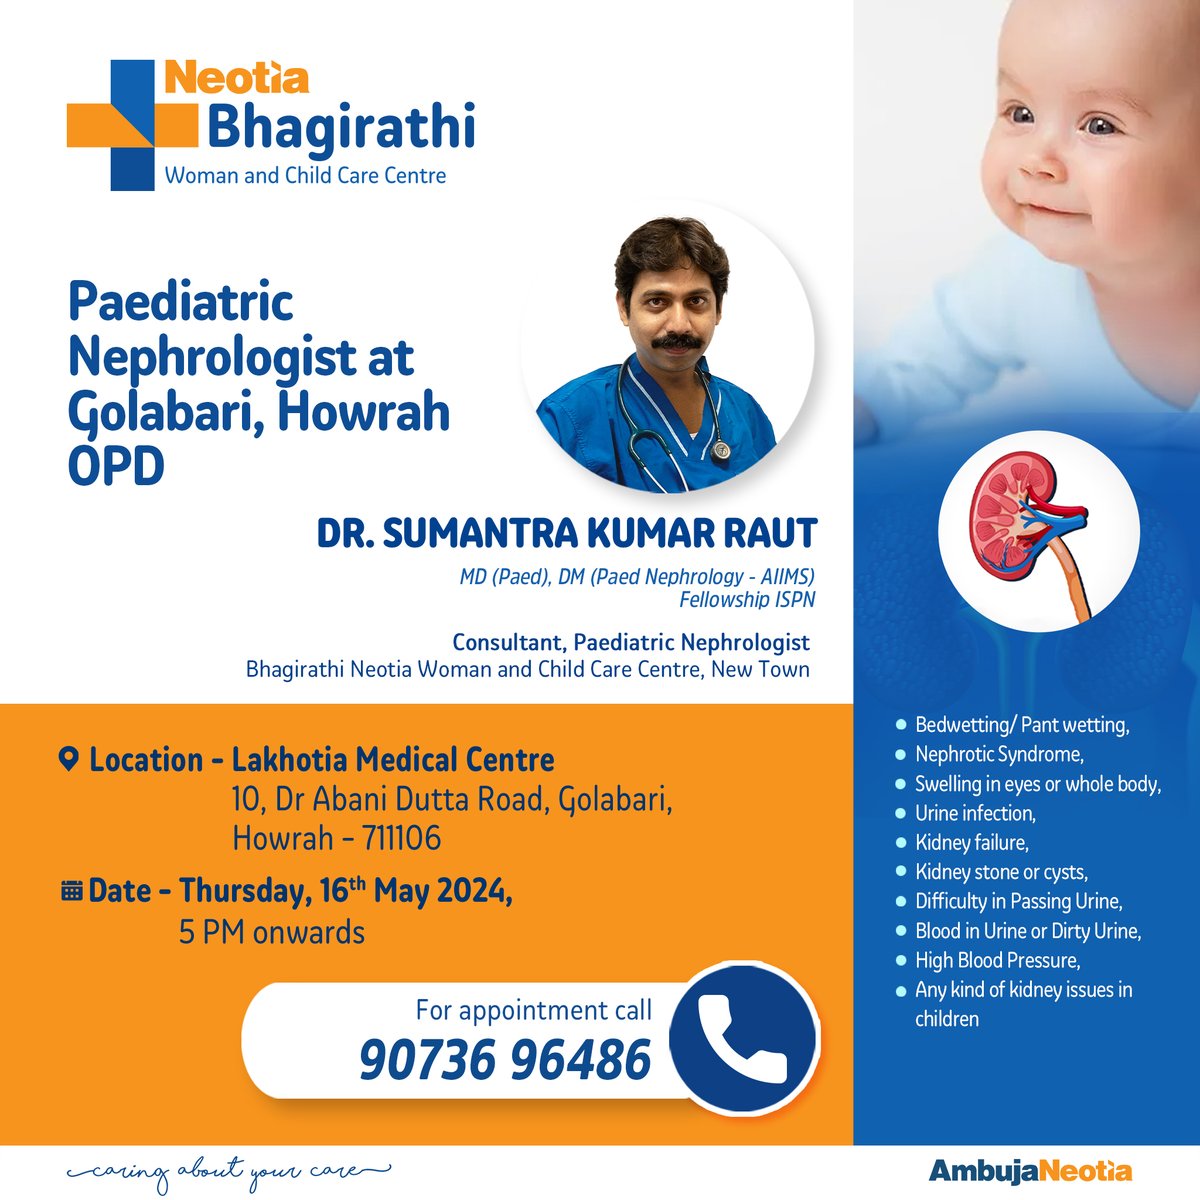 Paediatric Nephrologist of #BhagirathiNeotiaWomanandChildCareCentreNewTown will be available on Thursday, 16th May 2024 at Golabari, Howrah.
Contact : 9073696486
#BNWCCC #CaringAboutYourCare #paednephro #Howrah #howrahclinic  #kidneychild #childcare #healthcare #AmbujaNeotia